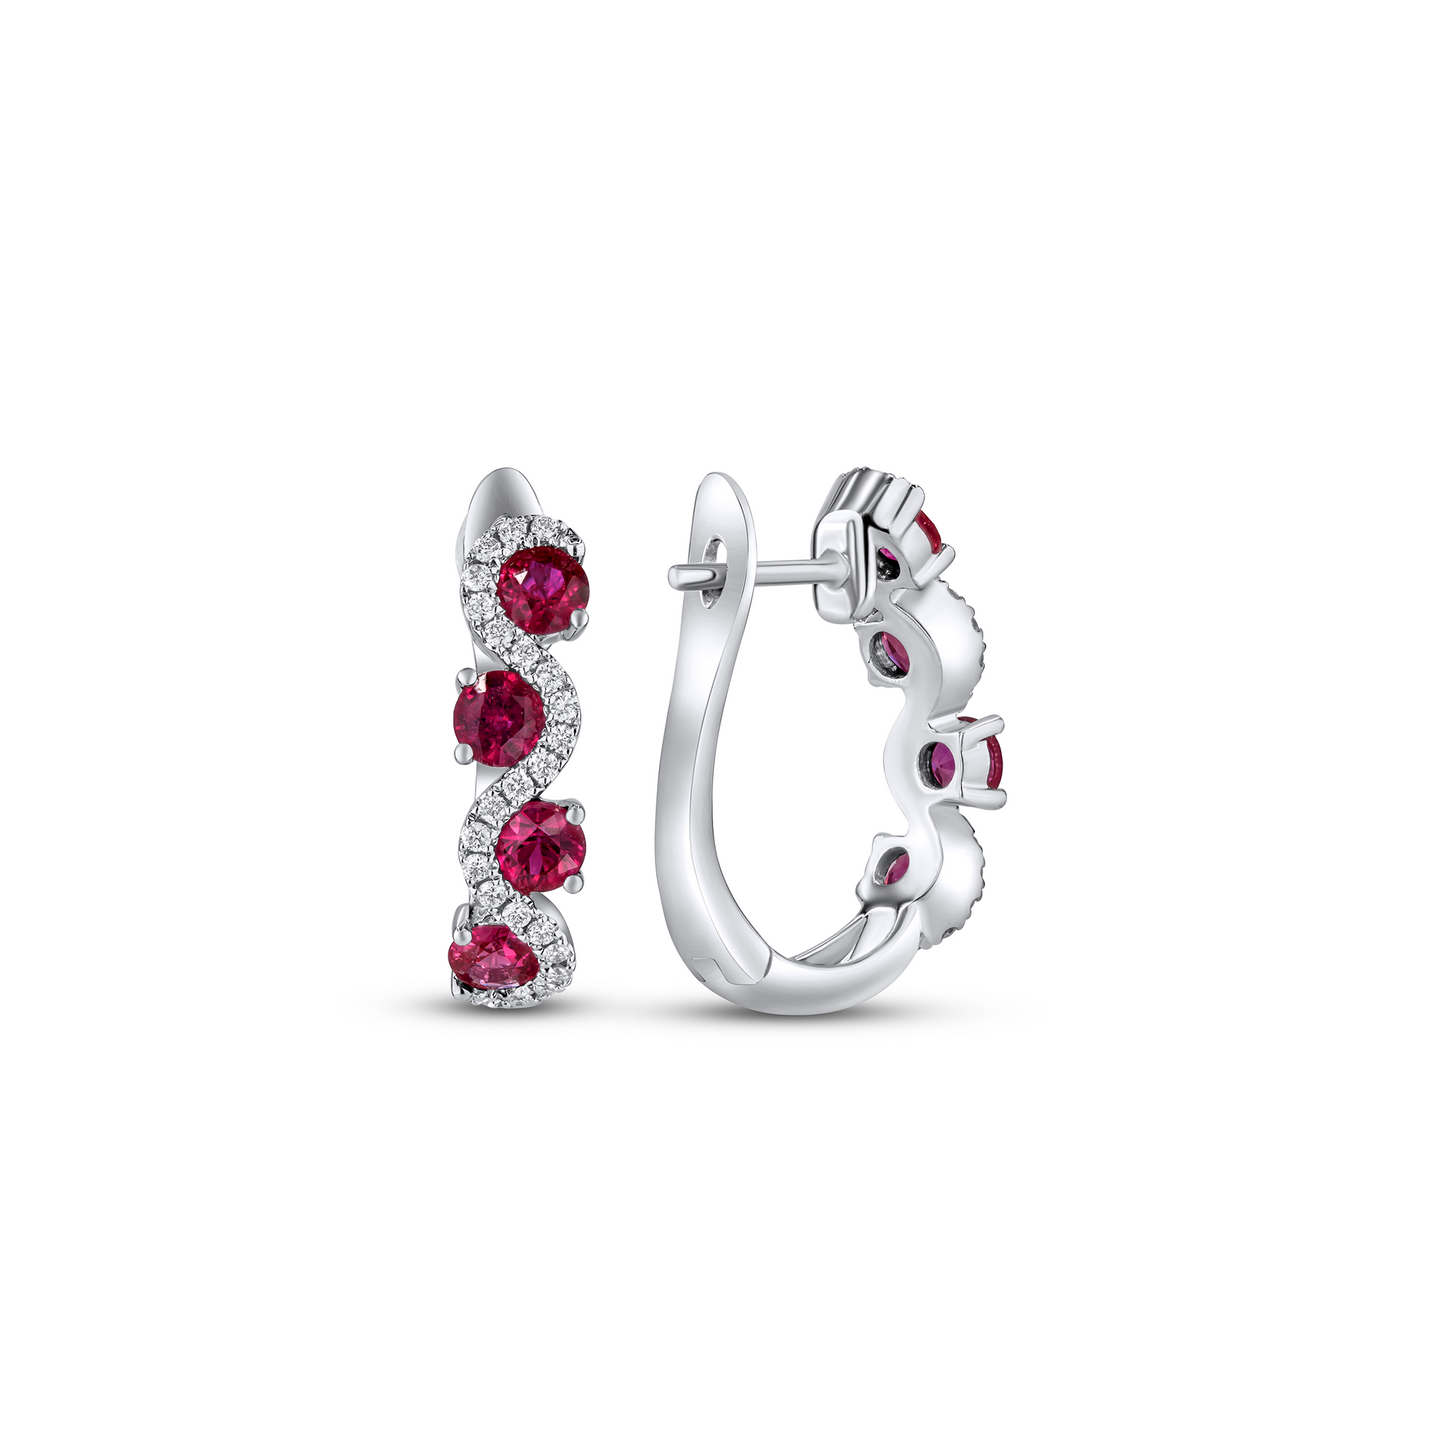 Sabel Collection White Gold Round Ruby and Diamond Hoop Earrings